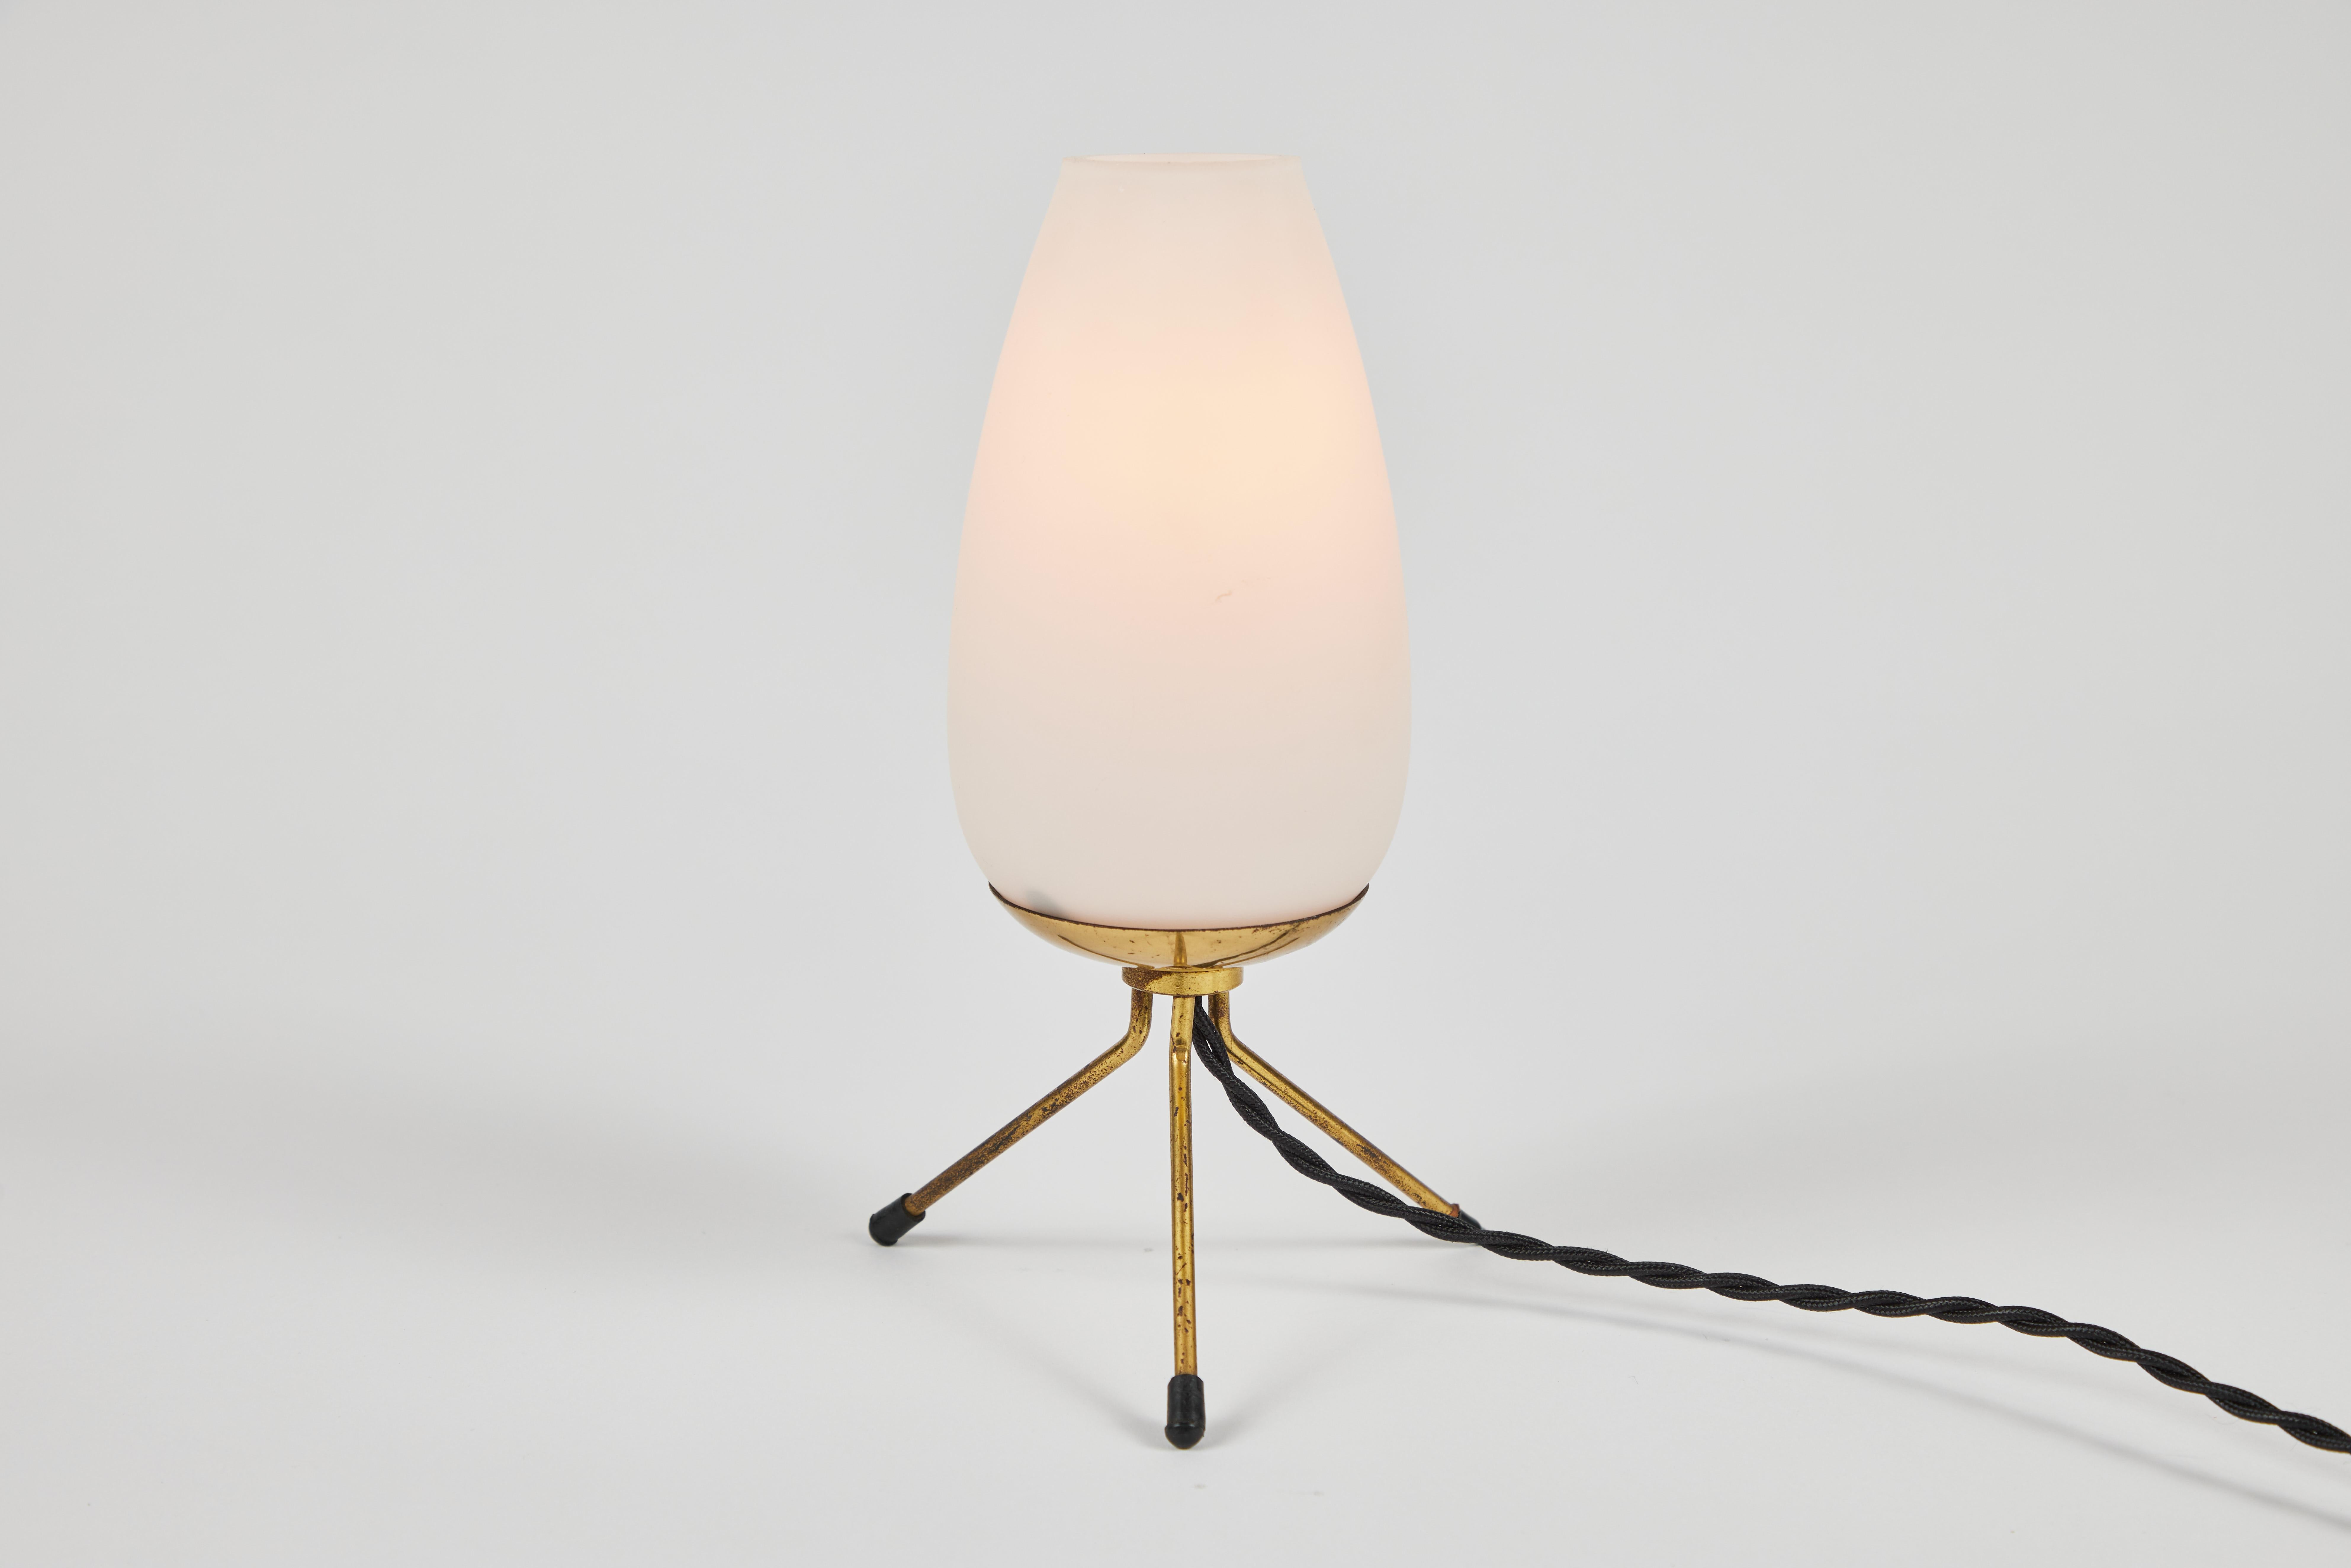 Pair of 1950s glass and brass tripod table lamps attributed to Stilnovo. Executed in thick opaline glass with brass tripod legs. A sculptural and refined design characteristic of 1950s Italian lighting at its highest level.

Price is for the